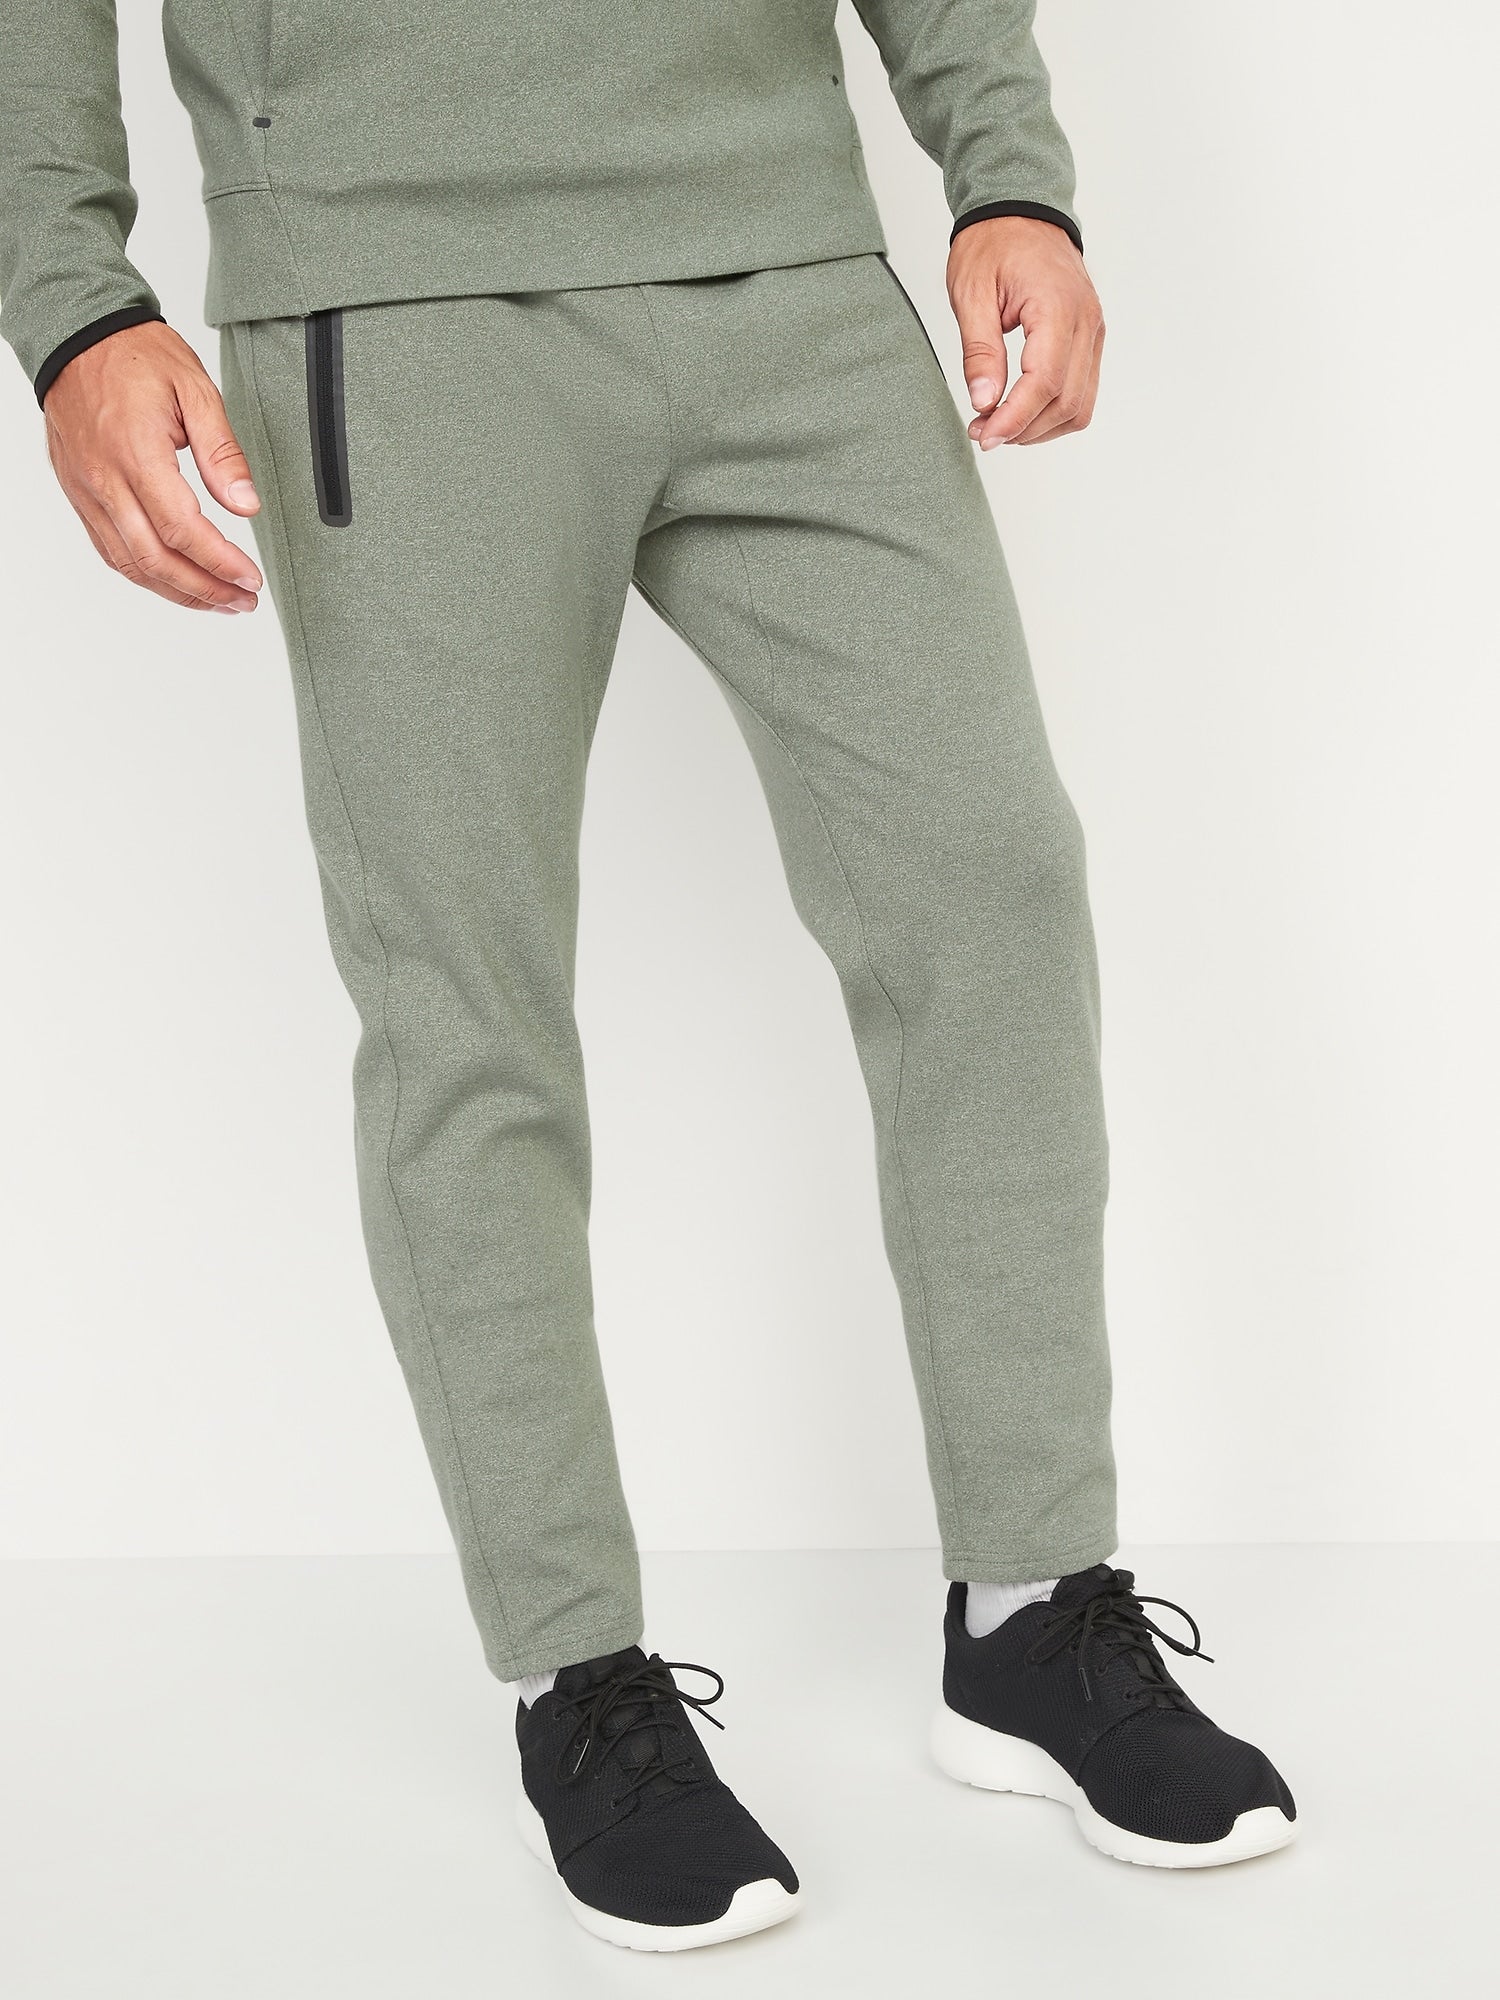 Old Navy Dynamic Fleece Tapered Sweatpants for Men – Search By Inseam